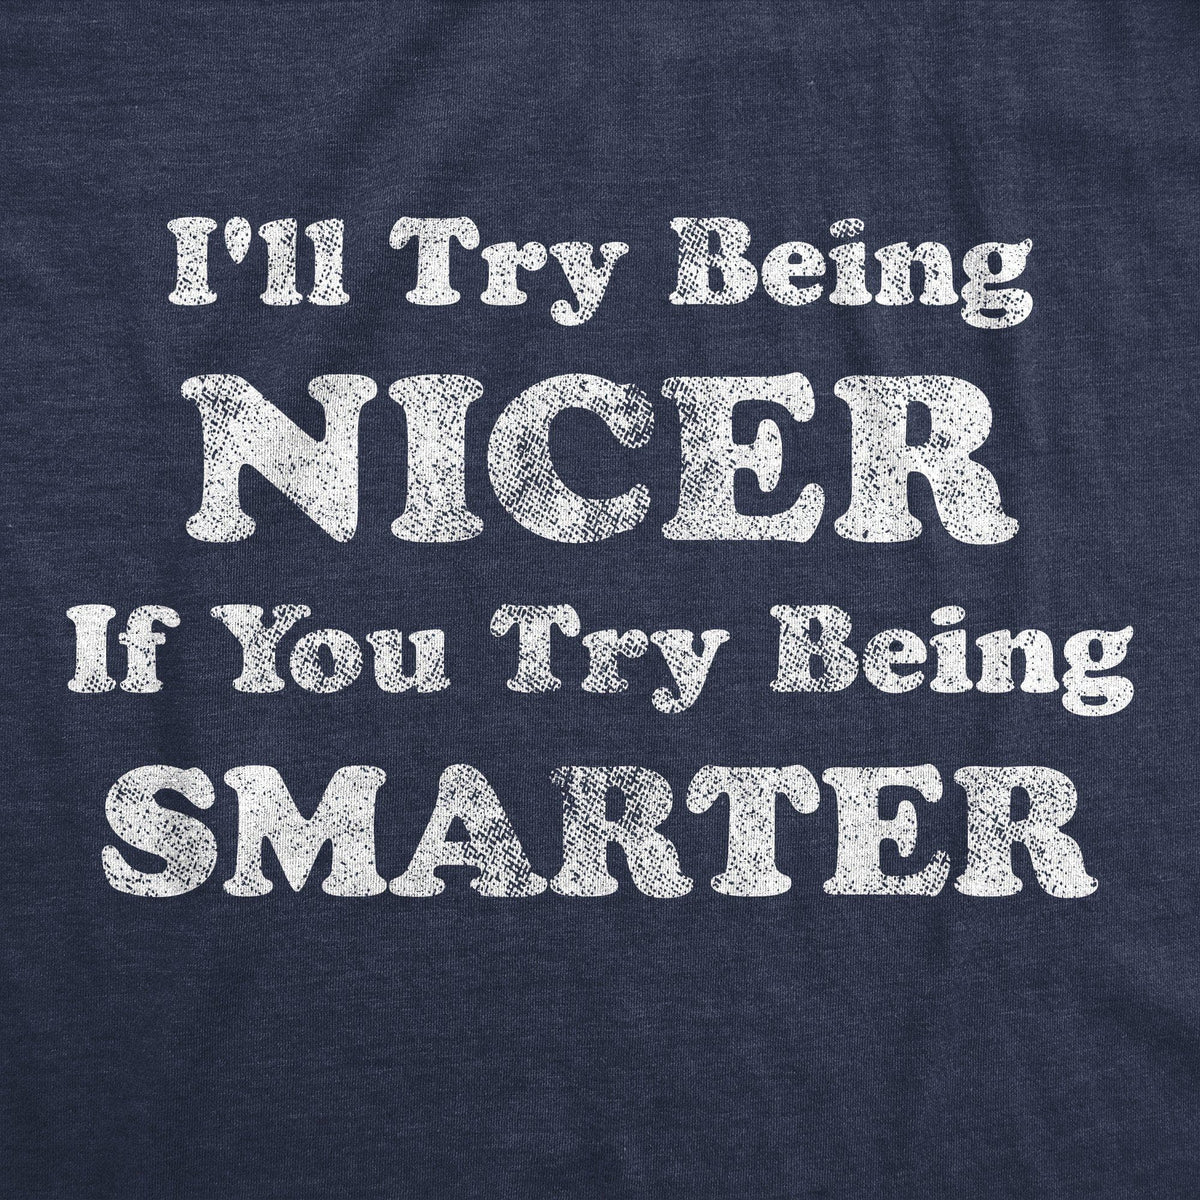 I&#39;ll Try Being Nicer If You Try Being Smarter Men&#39;s Tshirt - Crazy Dog T-Shirts